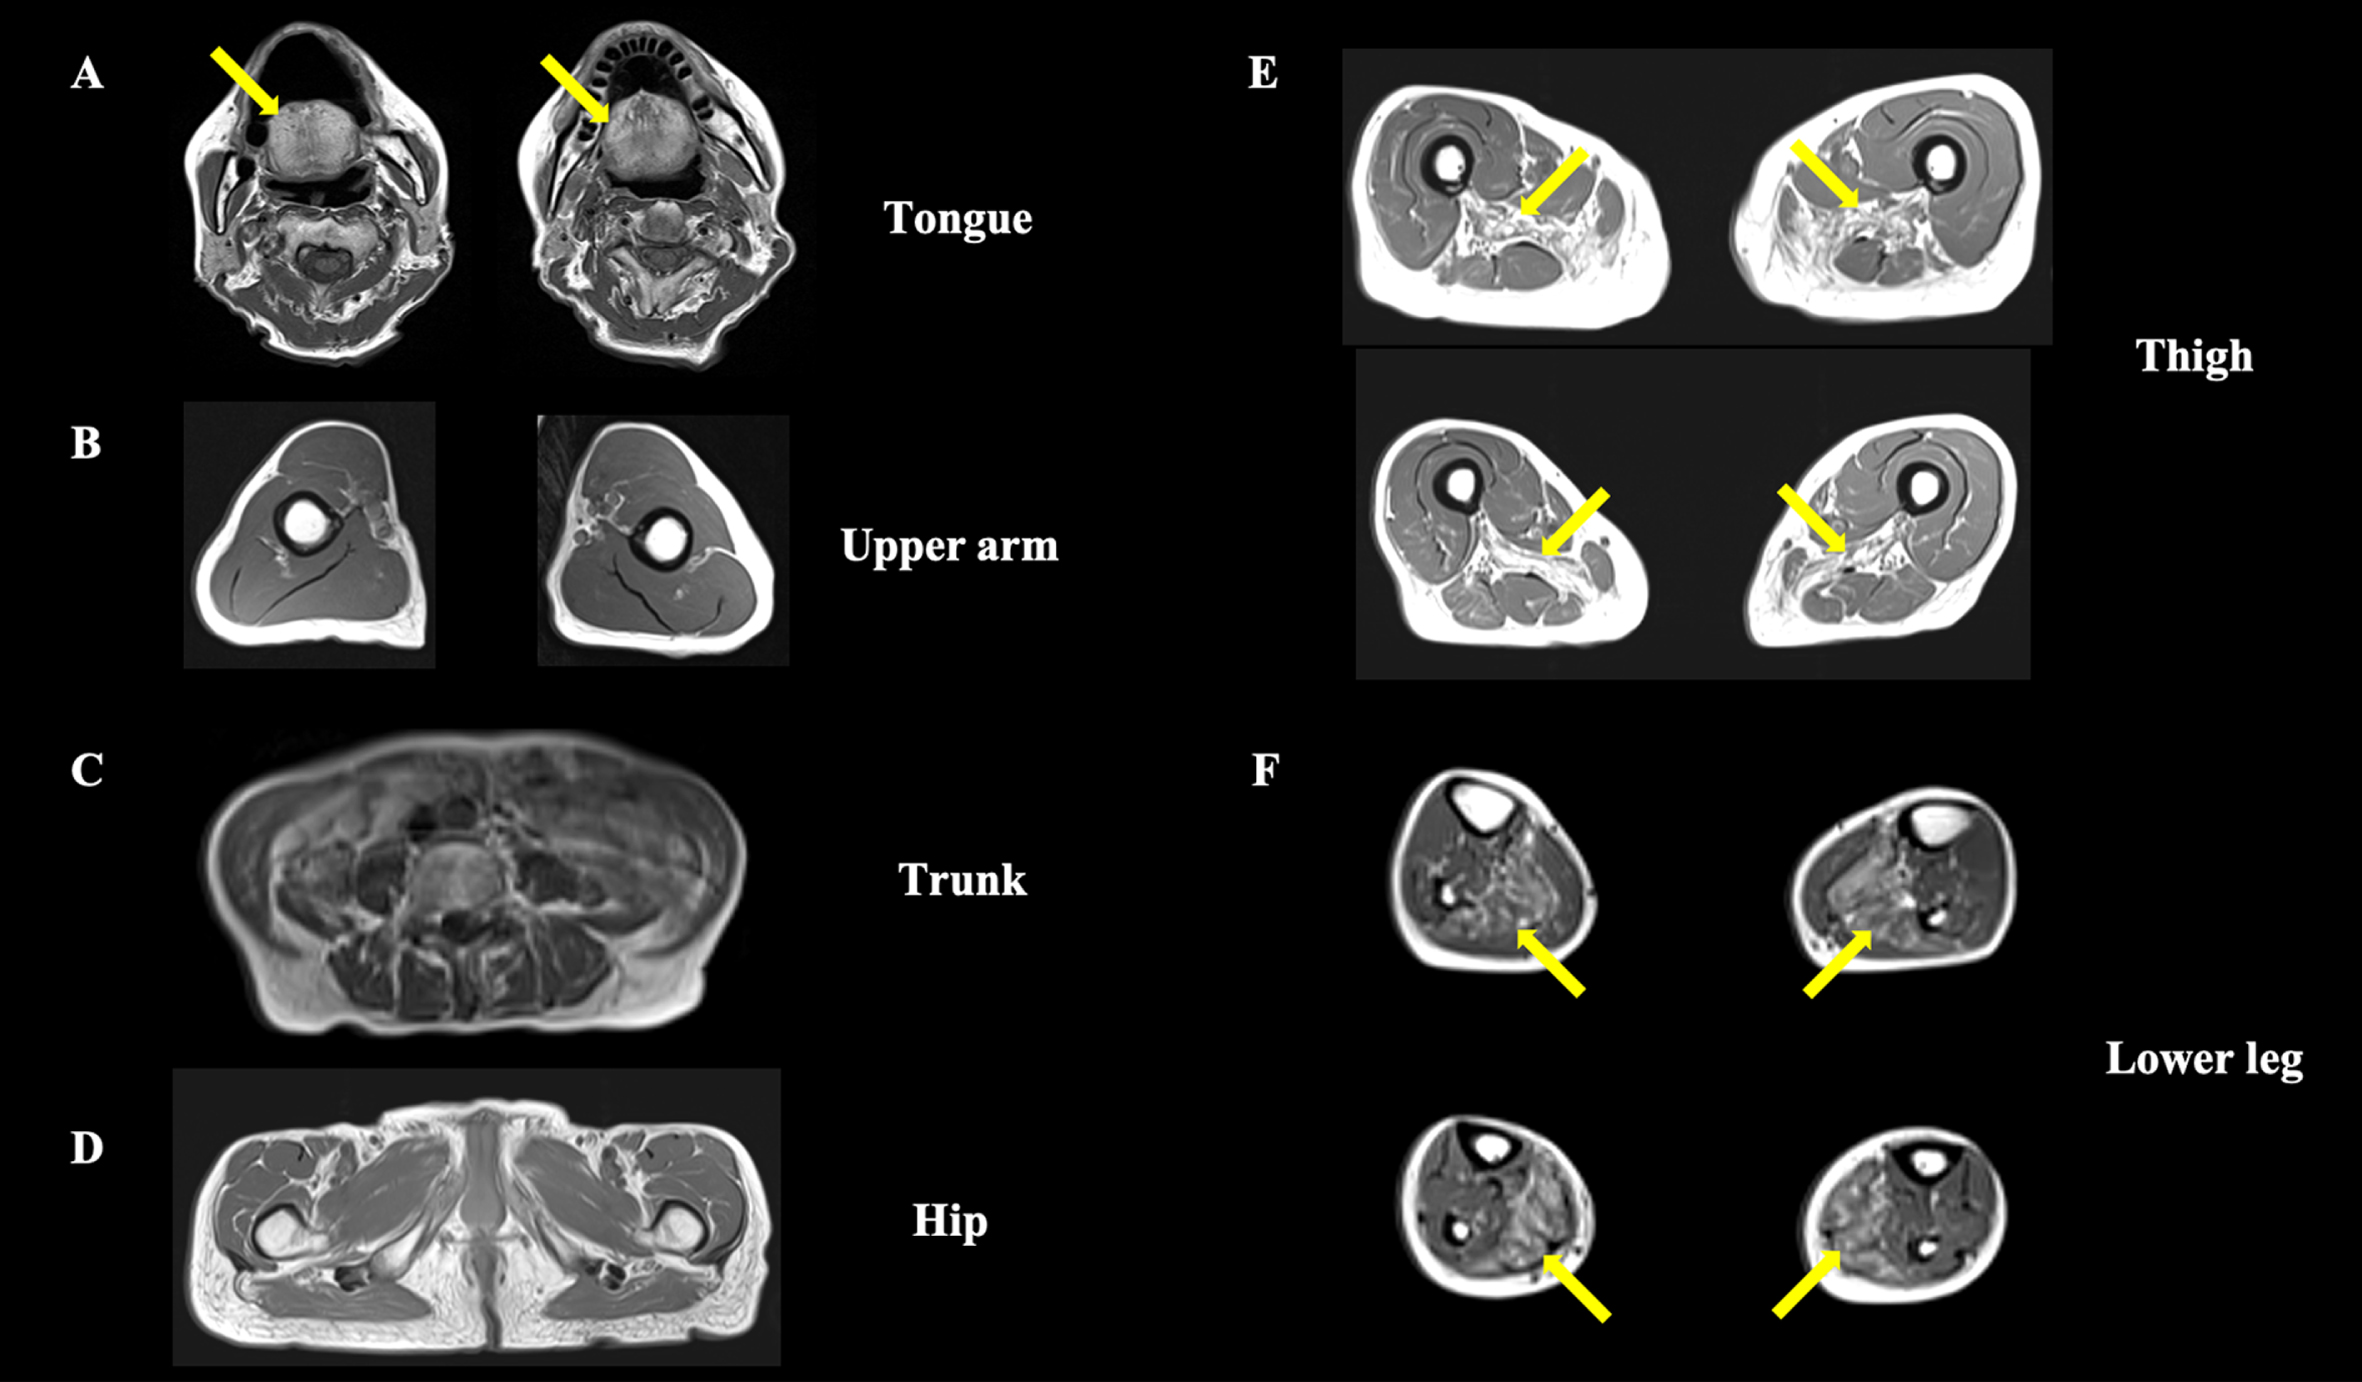 Axial T1-weighted muscle magnetic resonance imaging. (A) The tongue muscle tissue is replaced by fat (arrows), whereas other neck muscles are preserved. (B–D) The upper-arm, trunk, and hip region show no obvious muscle atrophy or fat replacement. (E) Bilateral adductor magnus muscle atrophy with fat replacement is observed at the thigh level (arrows). (F) The lower leg level shows bilateral soleus muscle fat replacement (arrows).